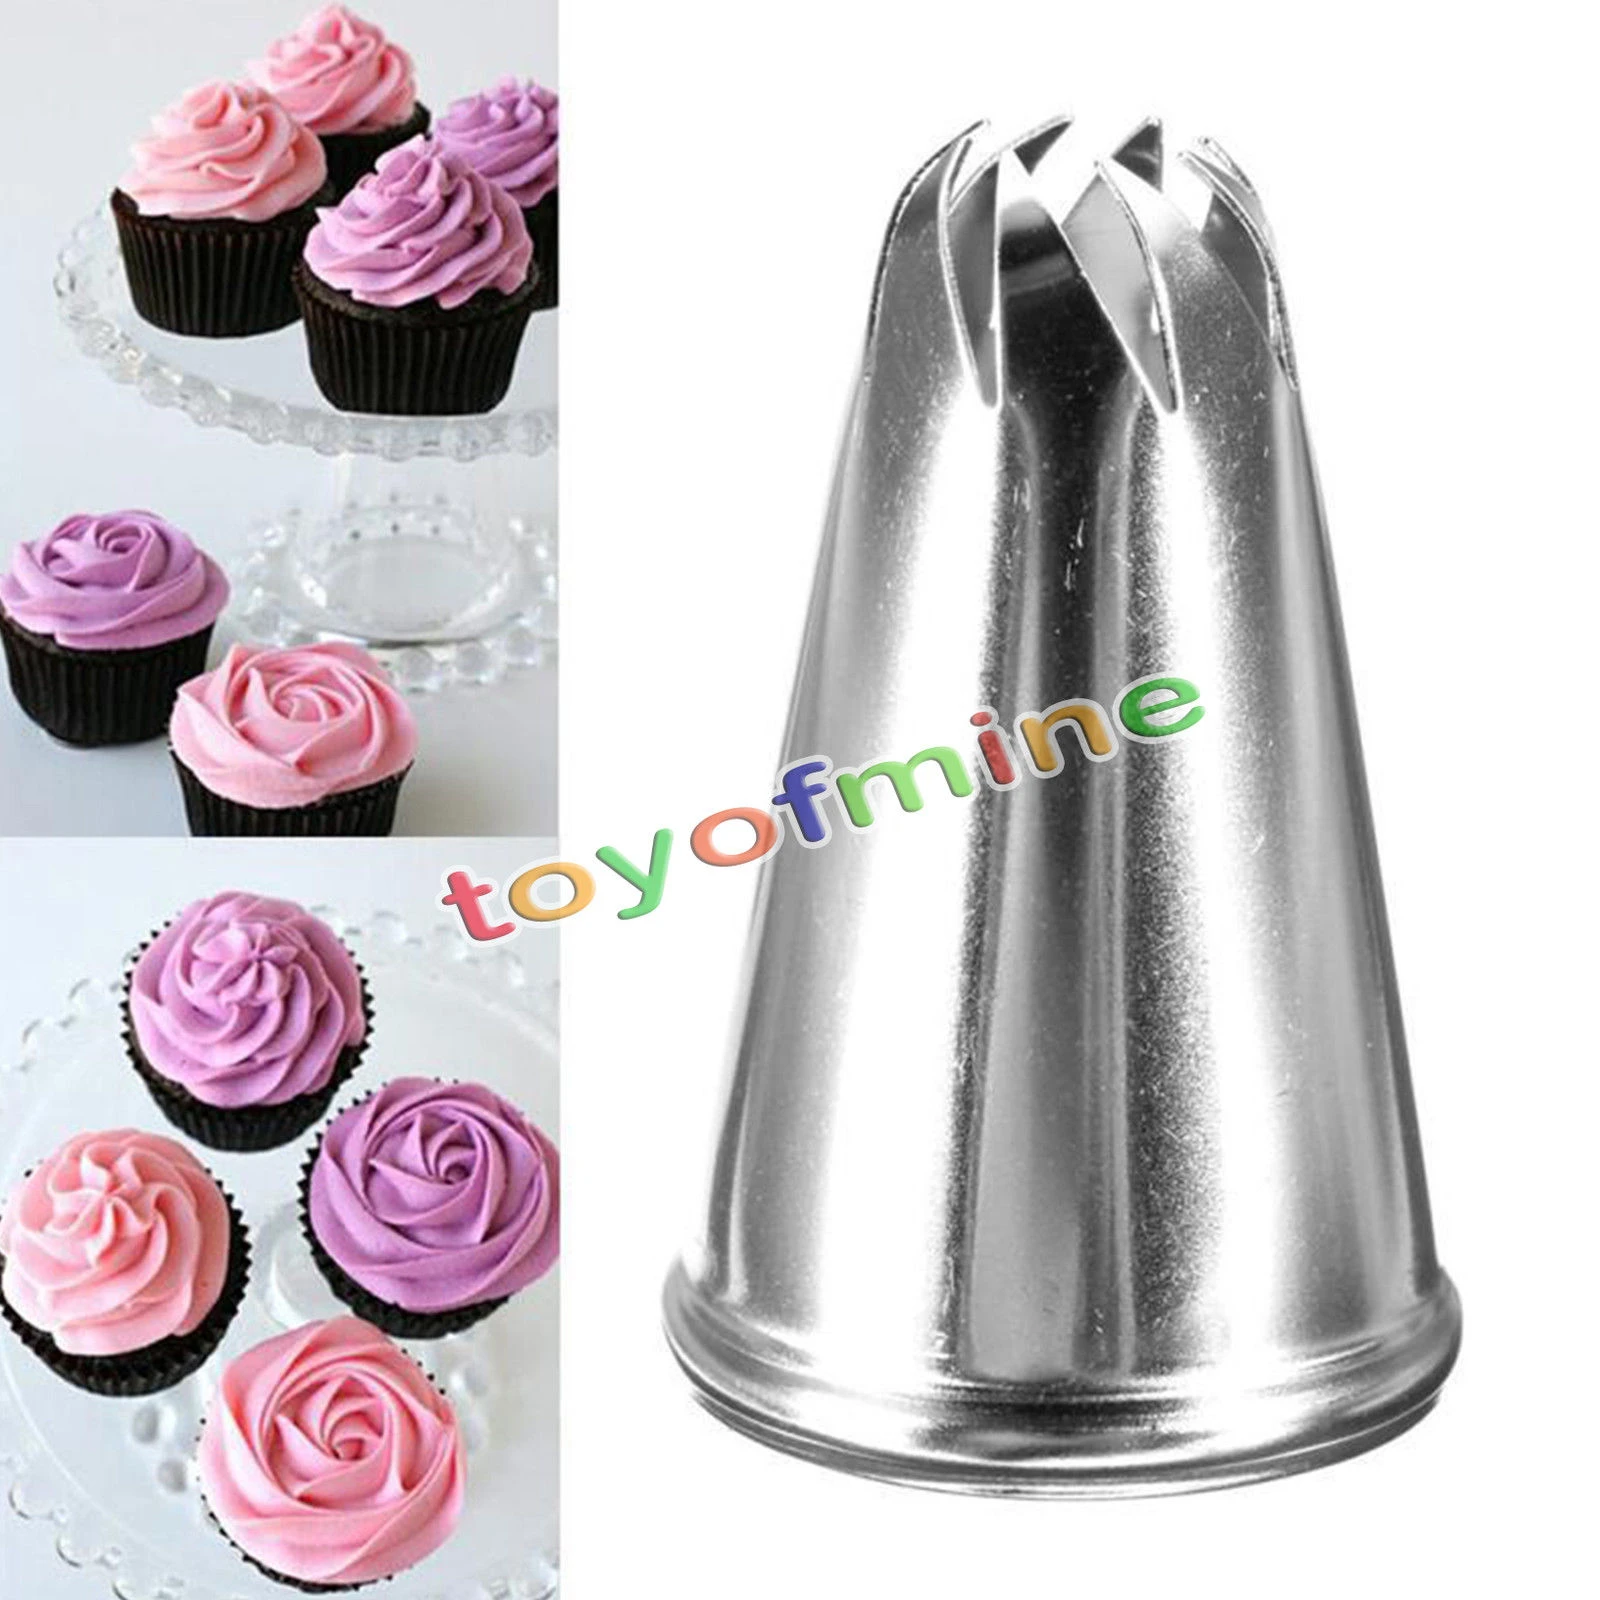 3Pc Drop Rose Flower Cup Ice Cream Piping Tip Nozzle Cake Decorating Pastry ^m^